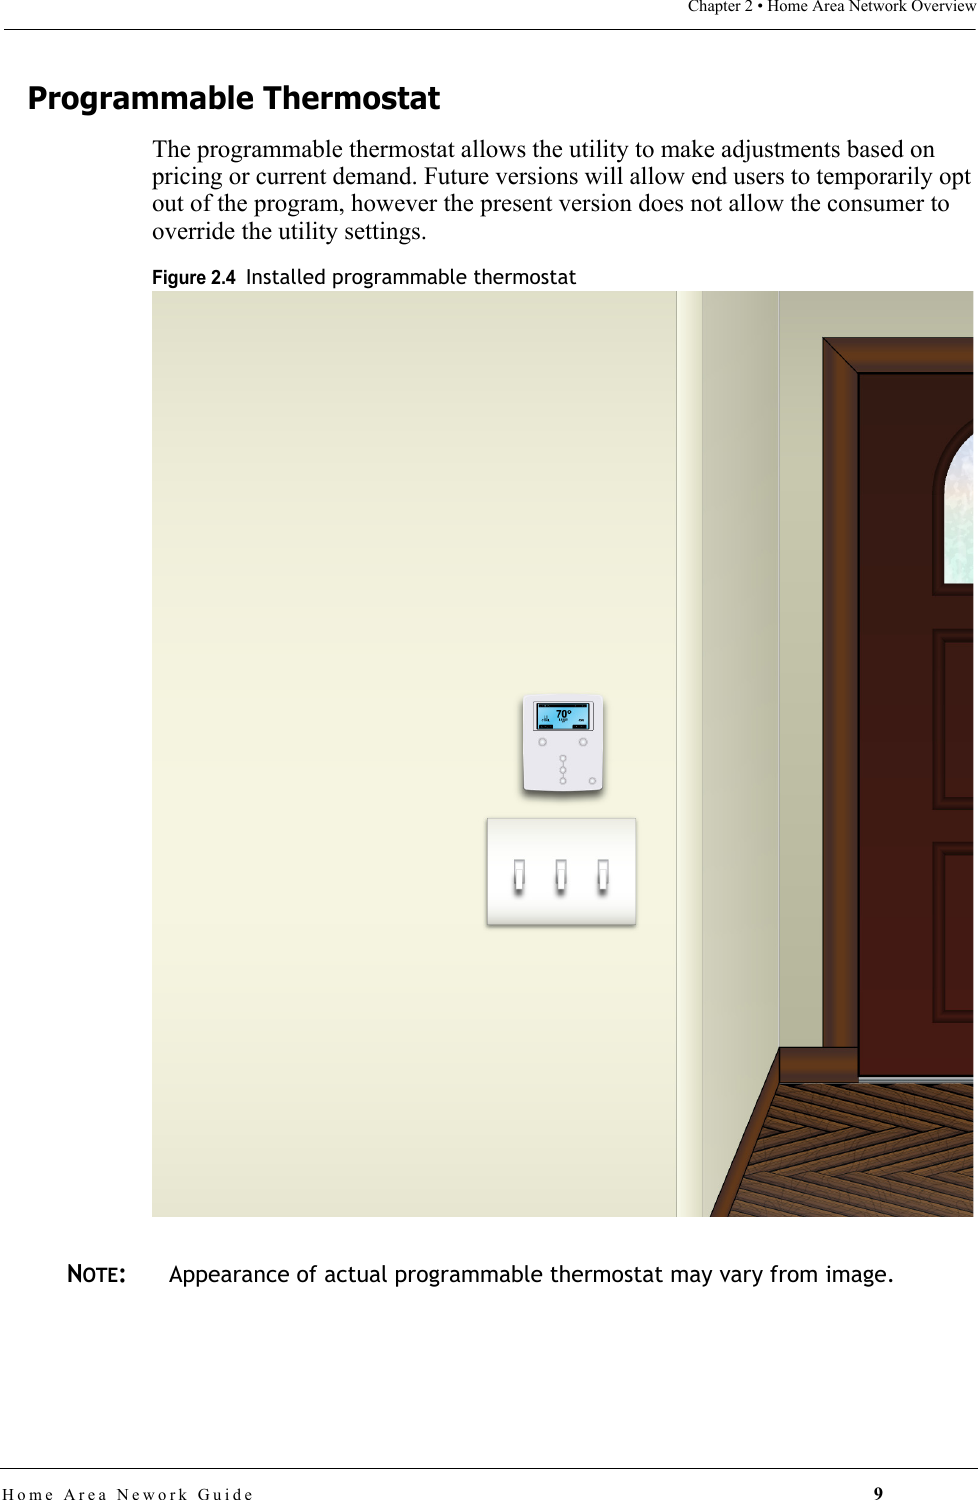 Chapter 2 • Home Area Network OverviewHome Area Nework Guide 9Programmable ThermostatThe programmable thermostat allows the utility to make adjustments based on pricing or current demand. Future versions will allow end users to temporarily opt out of the program, however the present version does not allow the consumer to override the utility settings.Figure 2.4  Installed programmable thermostatNOTE:Appearance of actual programmable thermostat may vary from image.